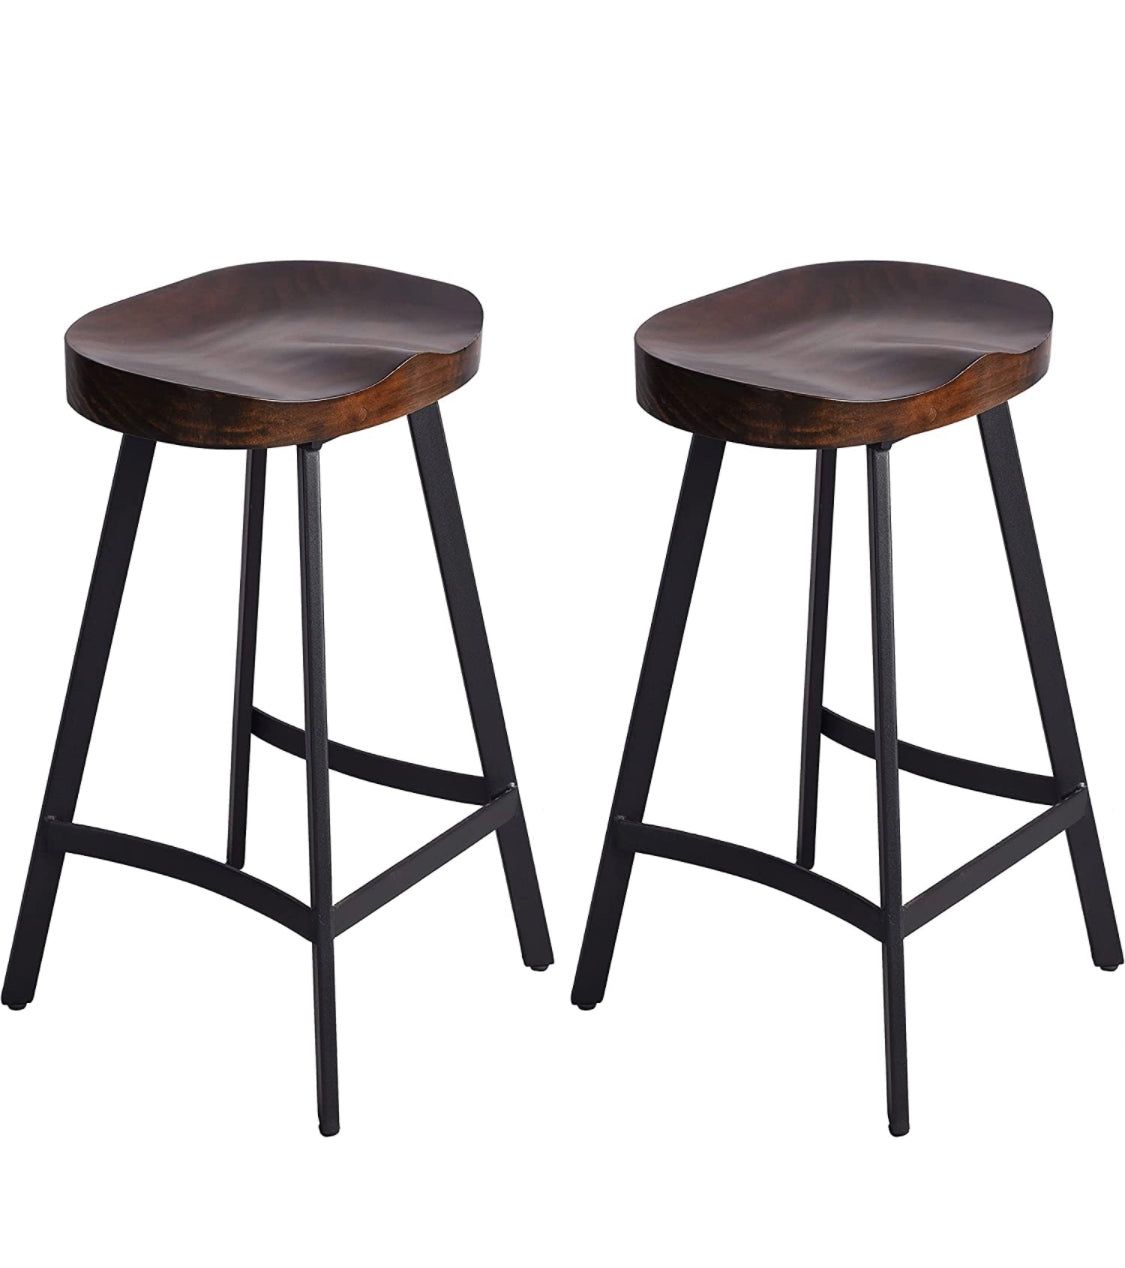 Set of 2 Industrial Bar Stool Saddle Seat-26.77 inch Counter Height Kitchen Stool-Metal and Wood Dining Stools-Set of 2,Backless,Stackable,Fully Welde